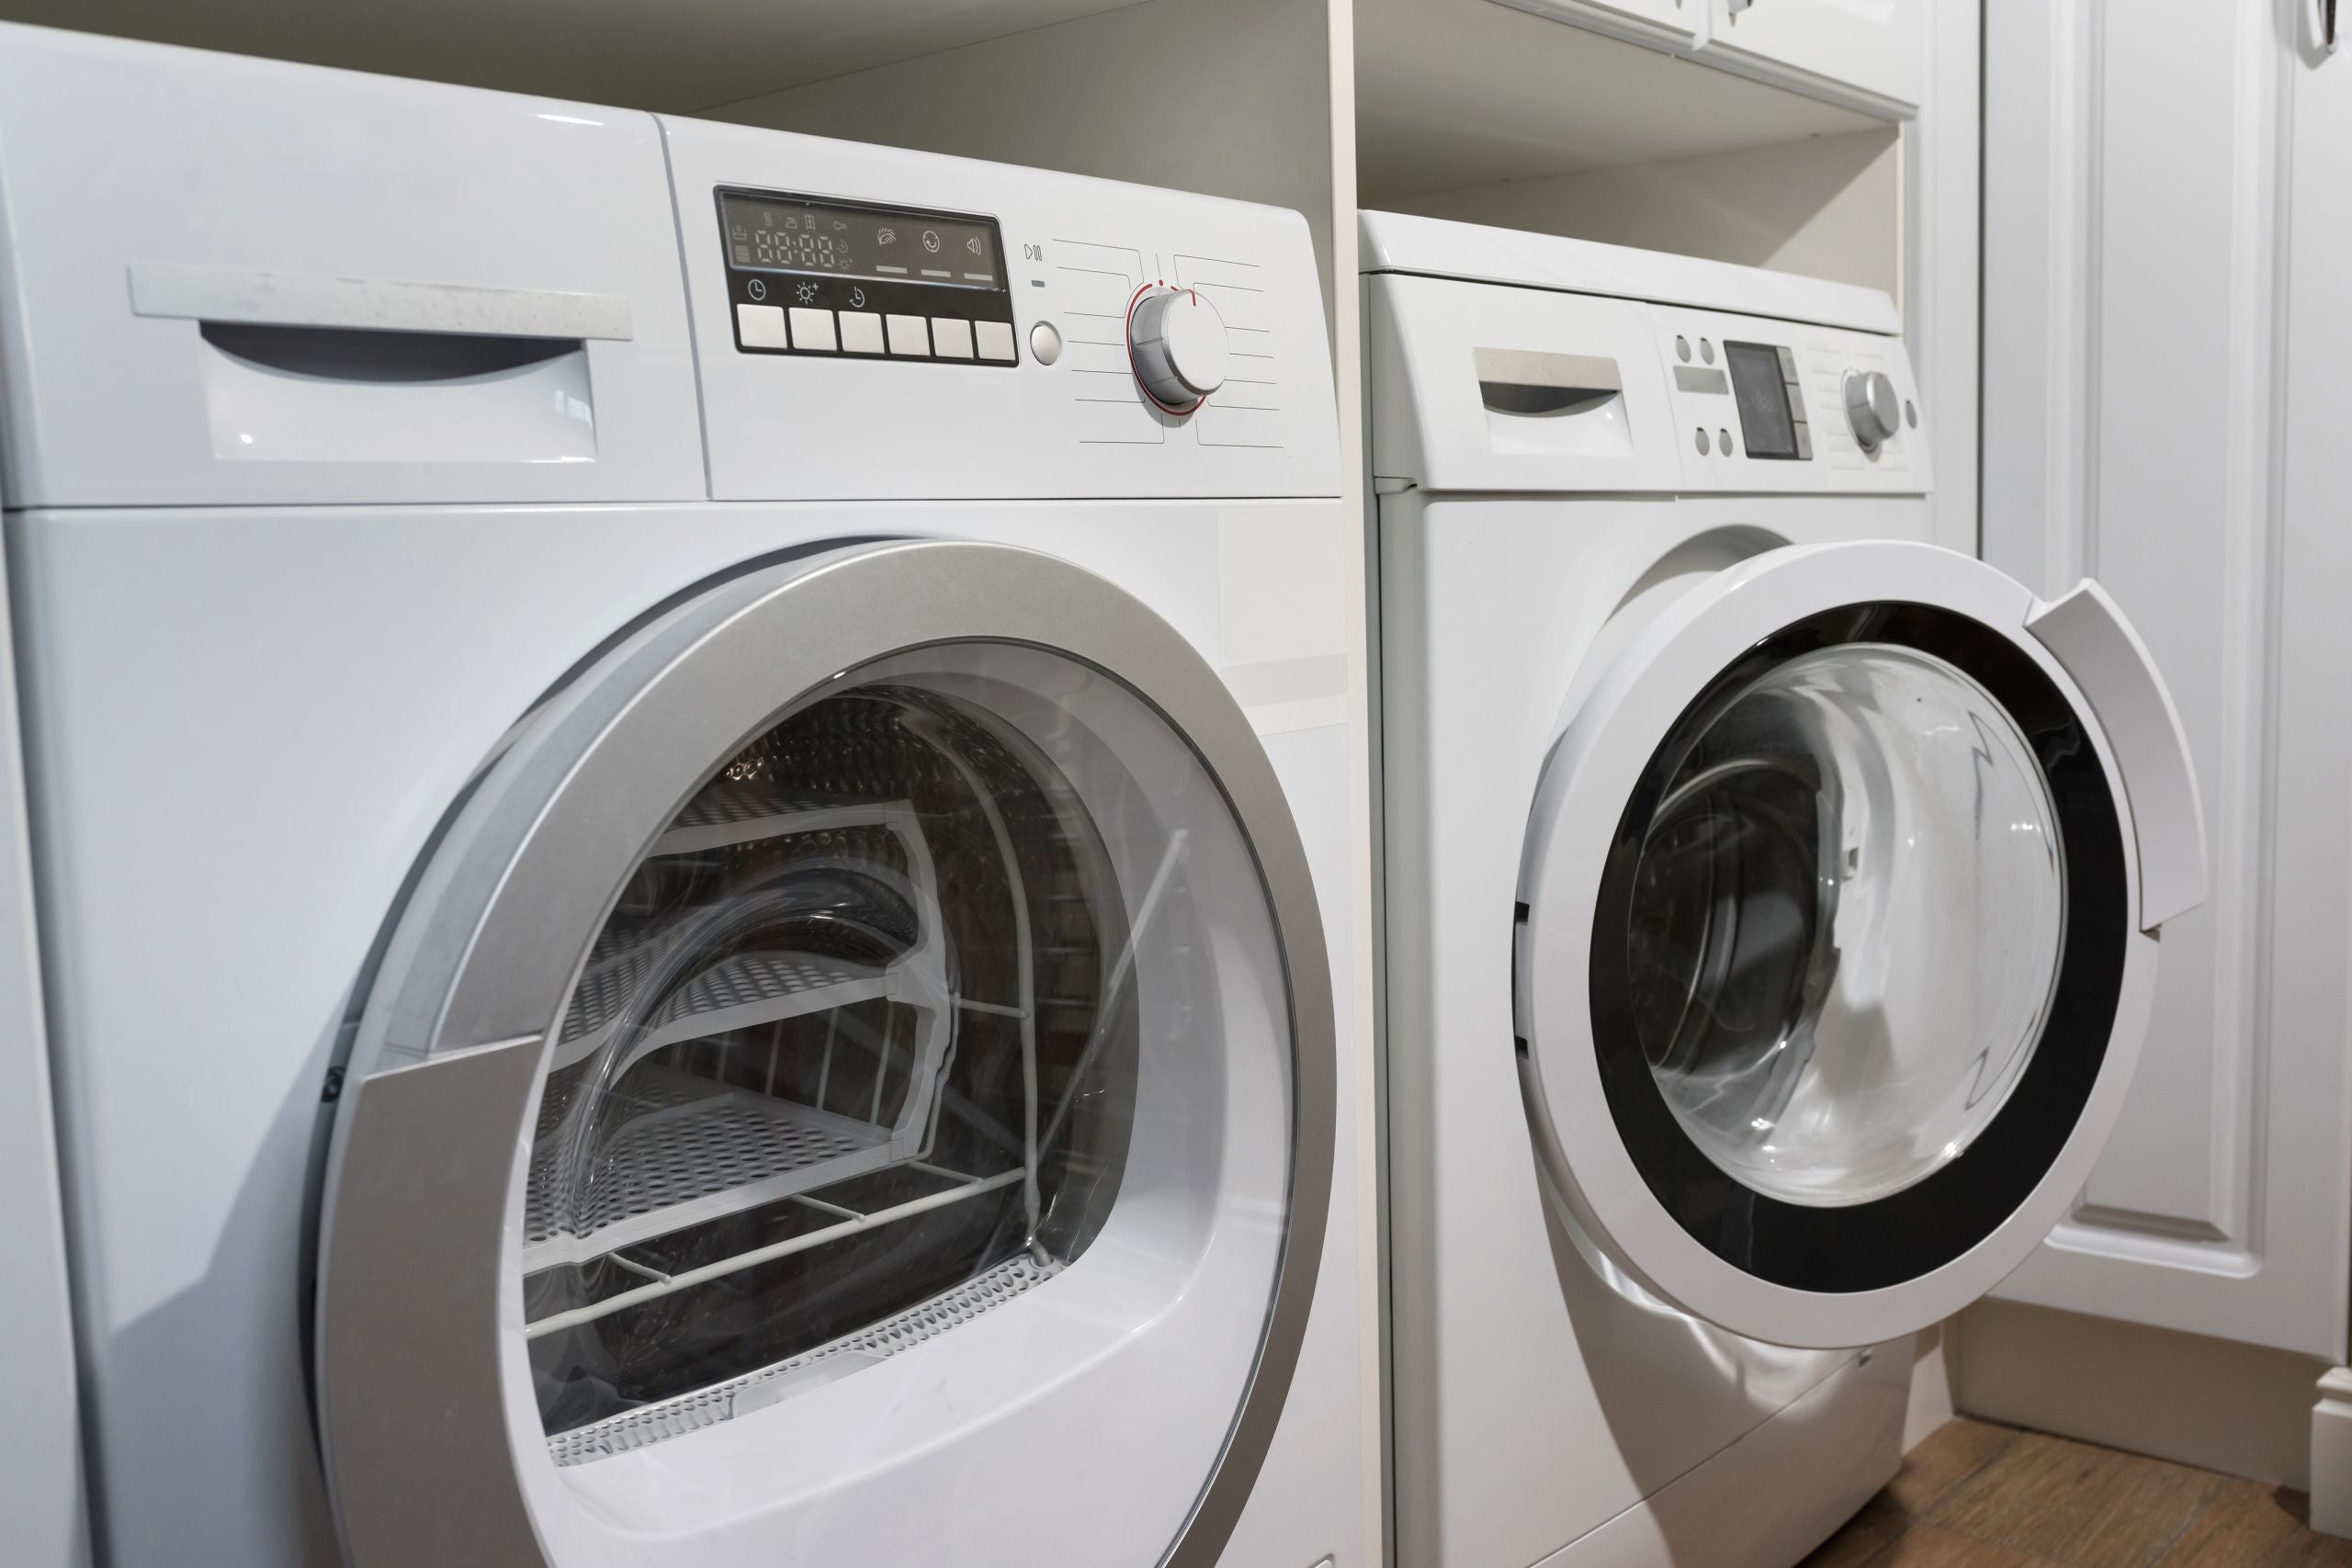 heat-pump-dryer-vs-electric-dryer-what-s-right-for-you-elephant-energy